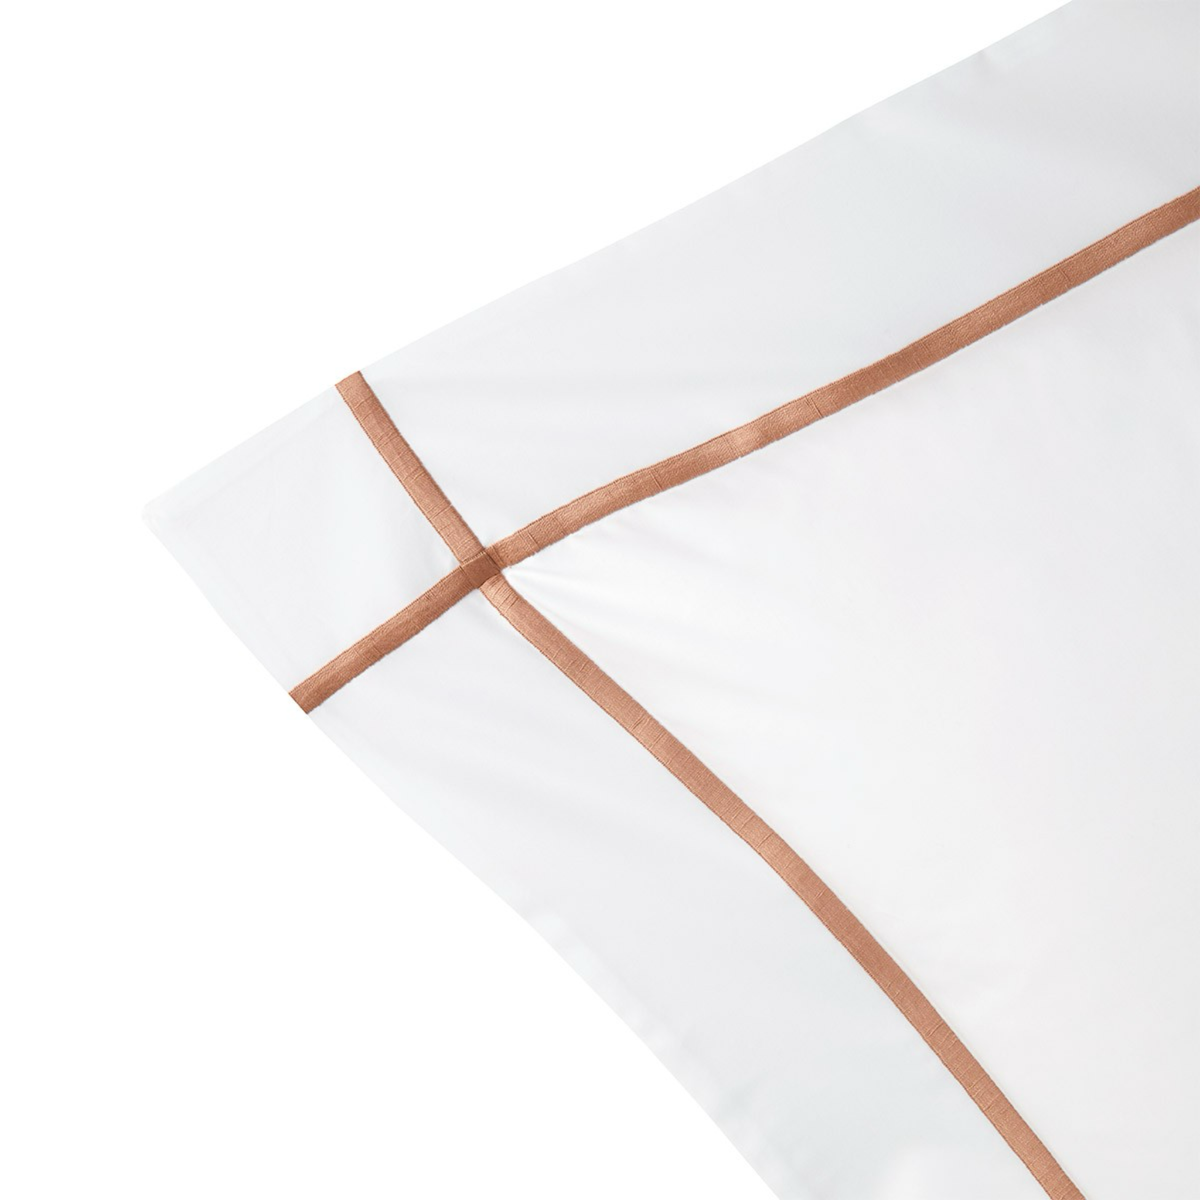 Embroidery Detail of Yves Delorme Athena Bedding in Sienna Color